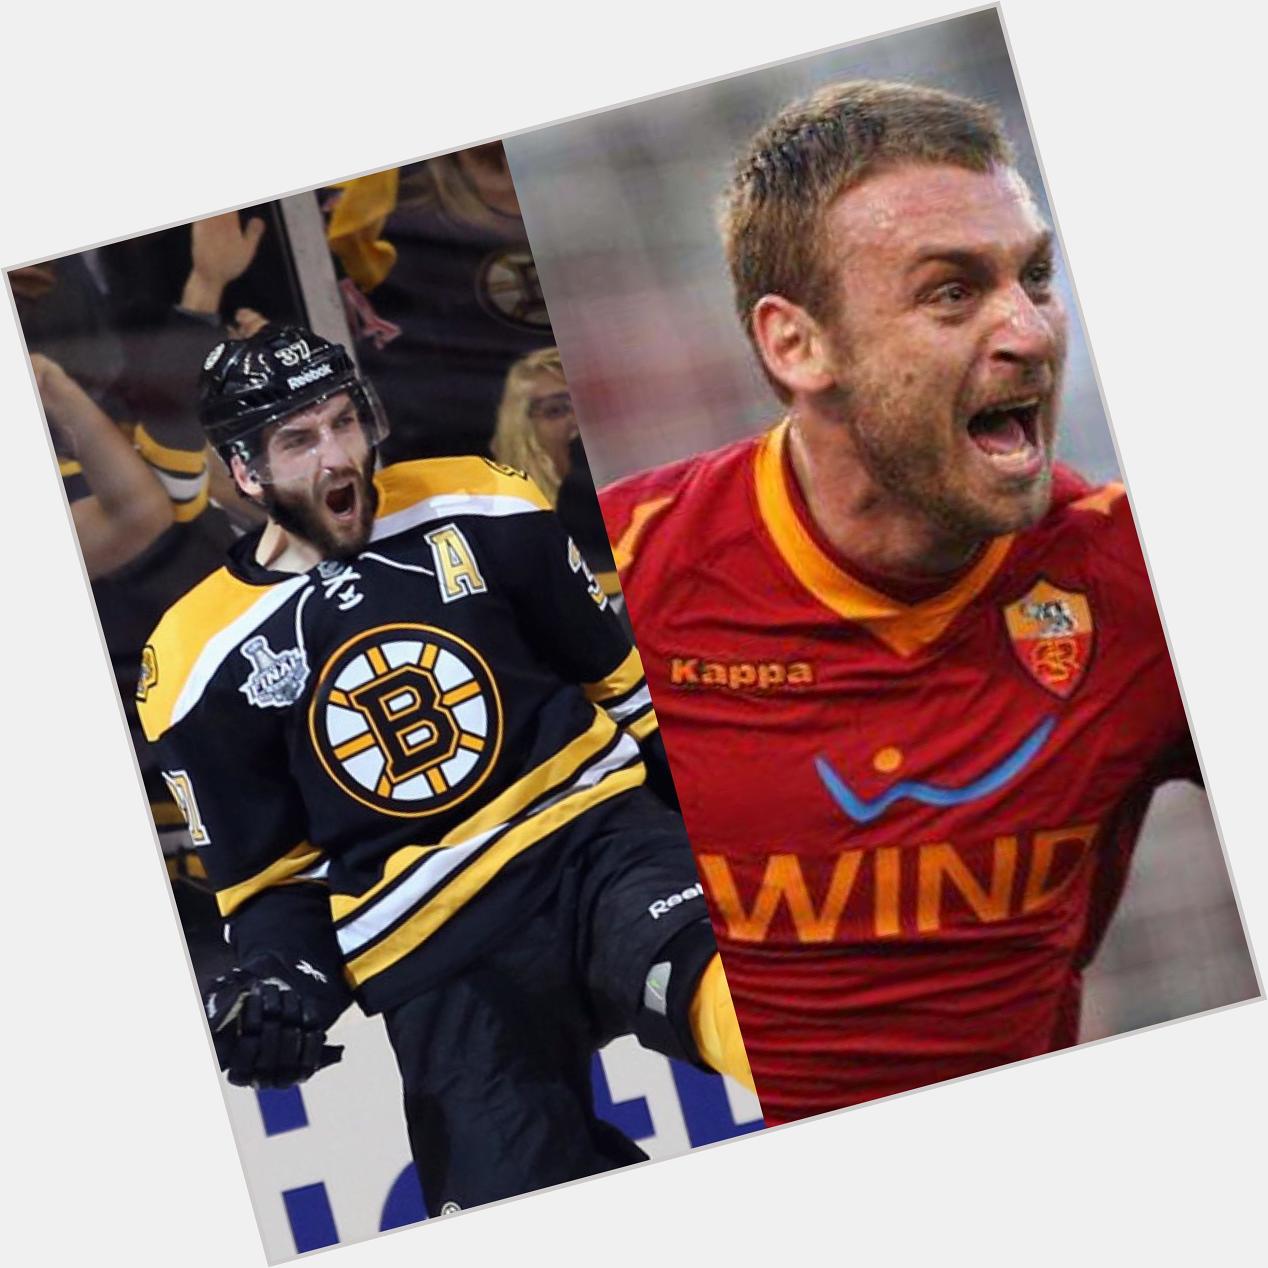 Happy birthday to my two inspirations in their respective sports. Patrice Bergeron and Daniele De Rossi 